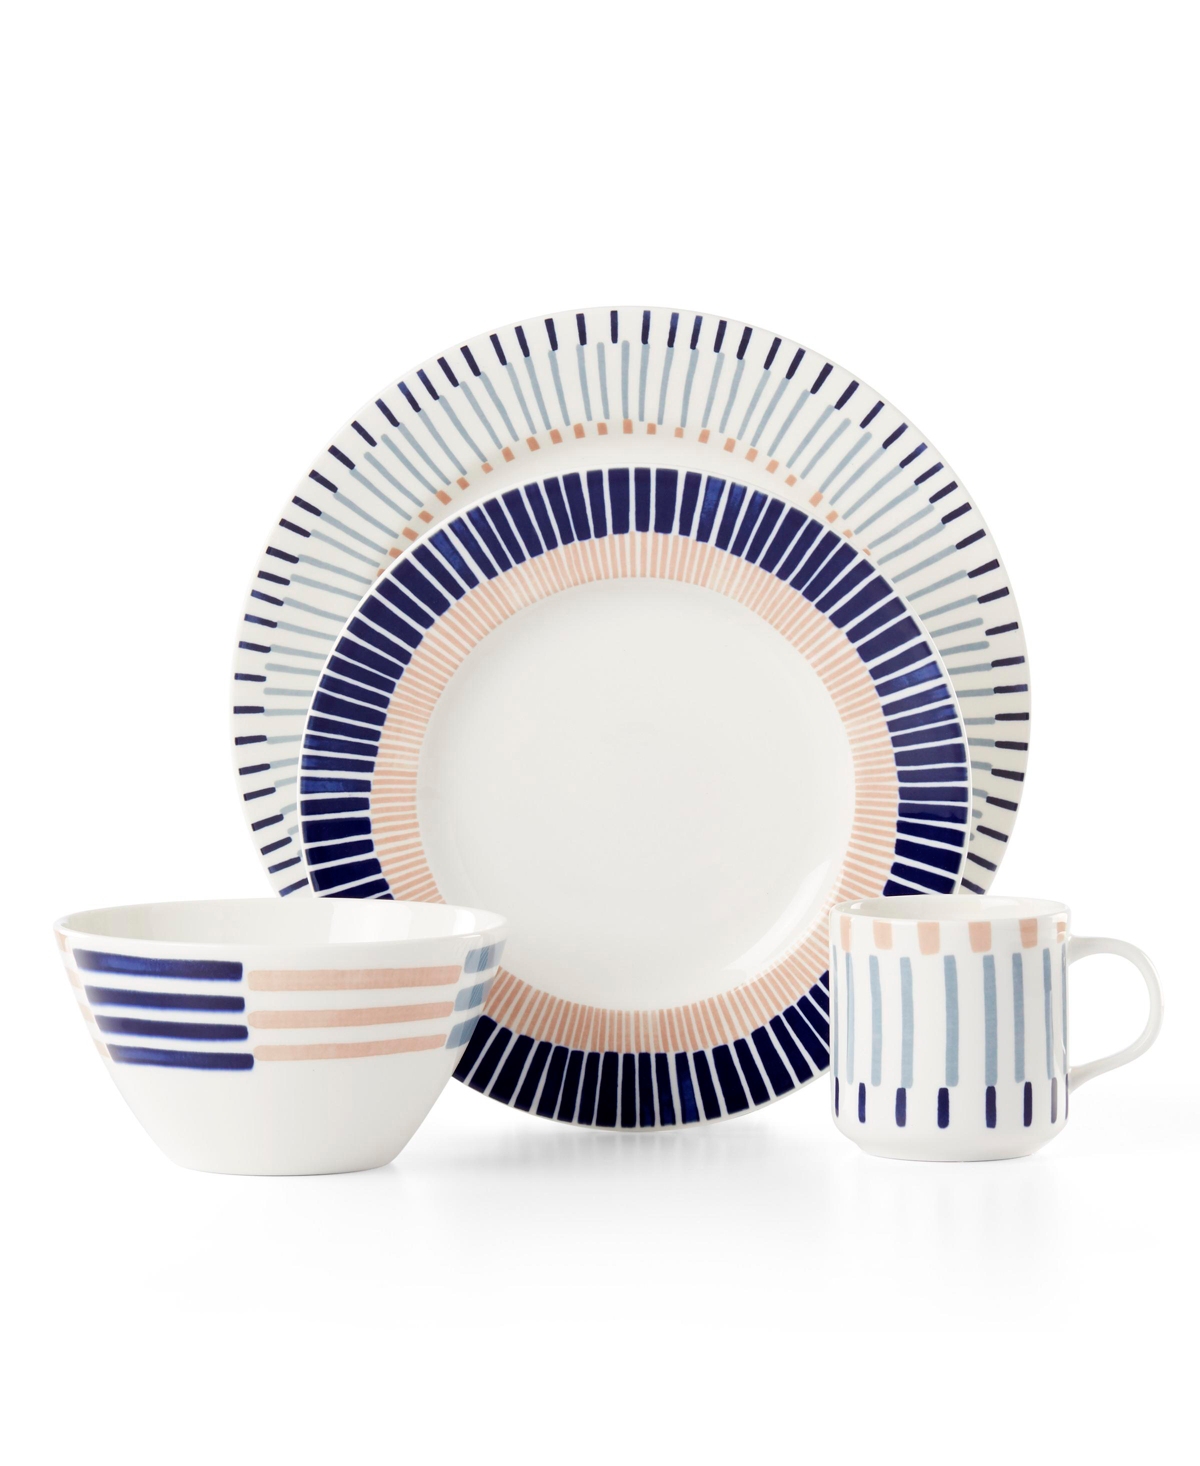 Kate Spade New York Brook Lane 4-piece Place Setting In White